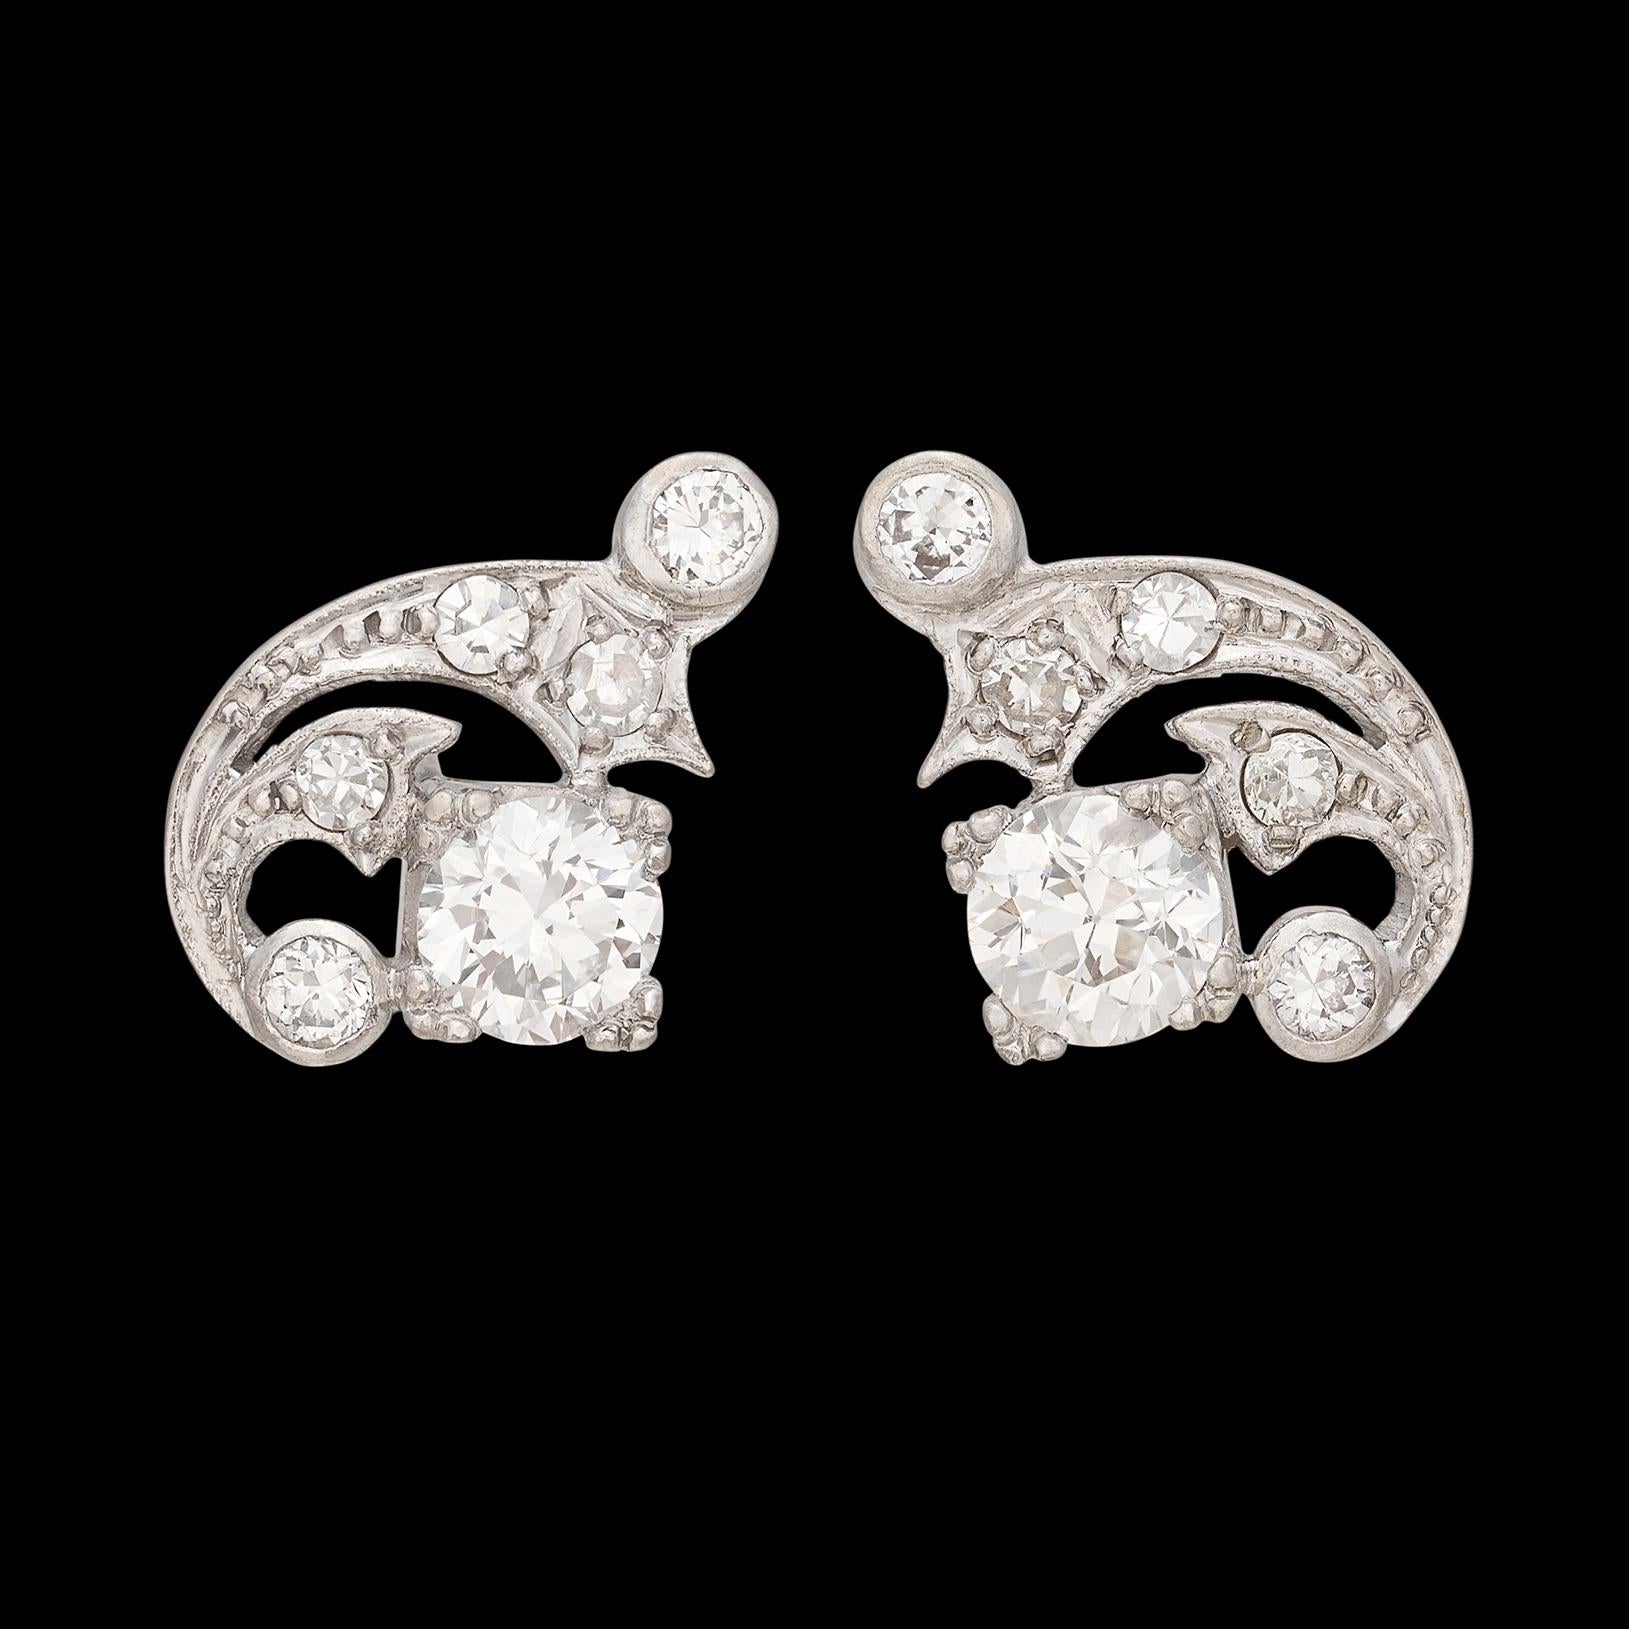 Two Old European Cut Diamonds are the centerpieces of these exceptional Art Deco diamond earrings. The two central Old Euro Diamonds weigh 1.15 carats with an additional 10 round cuts for 0.60 carats more diamond weight. The platinum earrings come